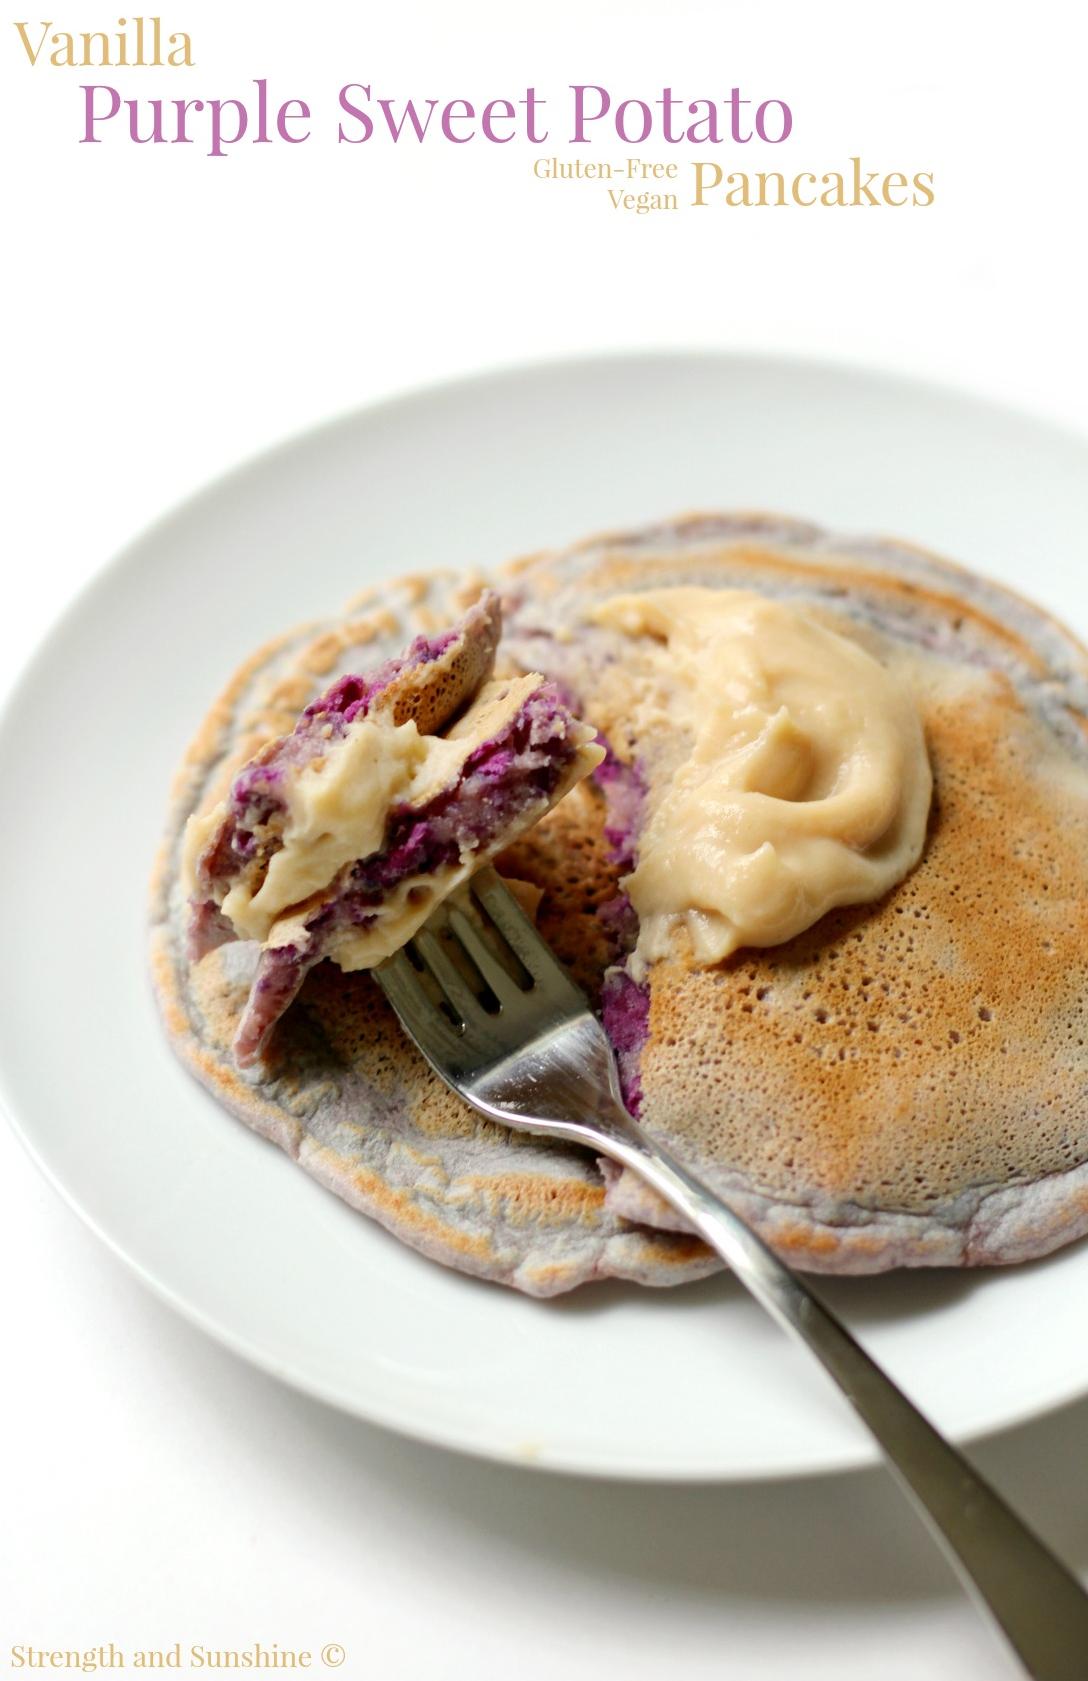  A stack of these fluffy pancakes will make your breakfast--and your day--brighter.